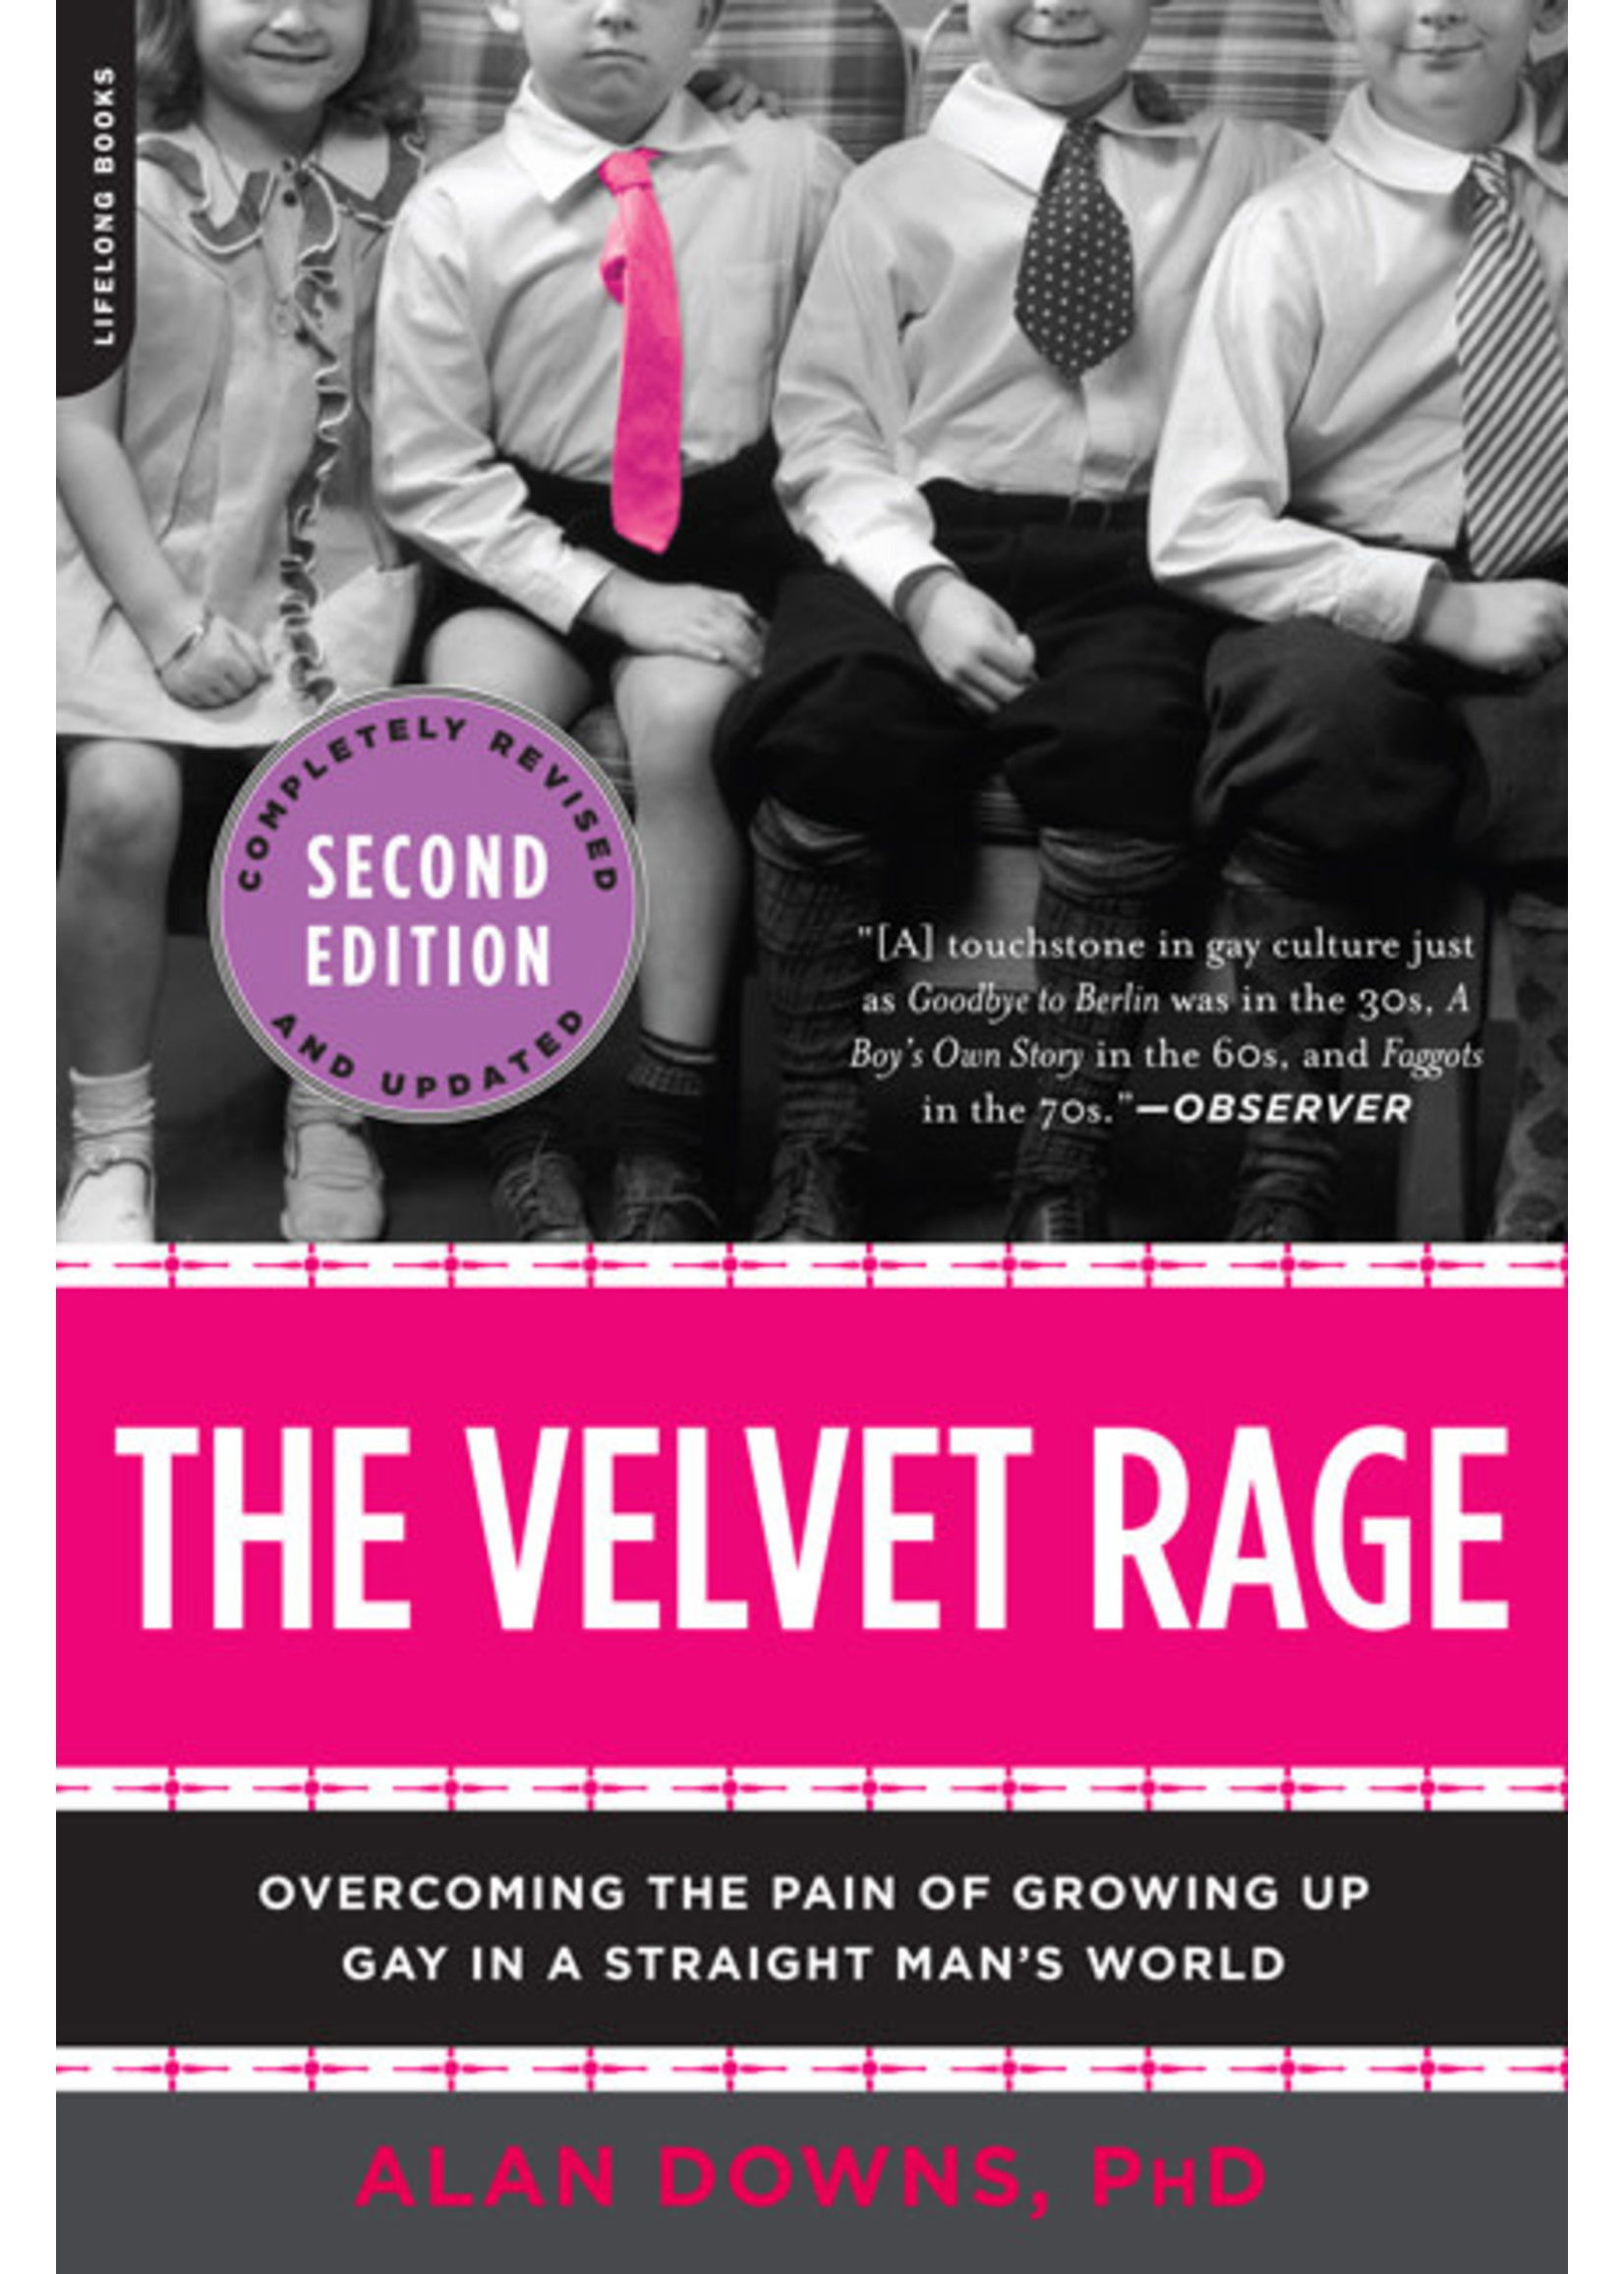 The Velvet Rage: Overcoming the Pain of Growing Up Gay in a Straight Man's World by Alan Downs PhD